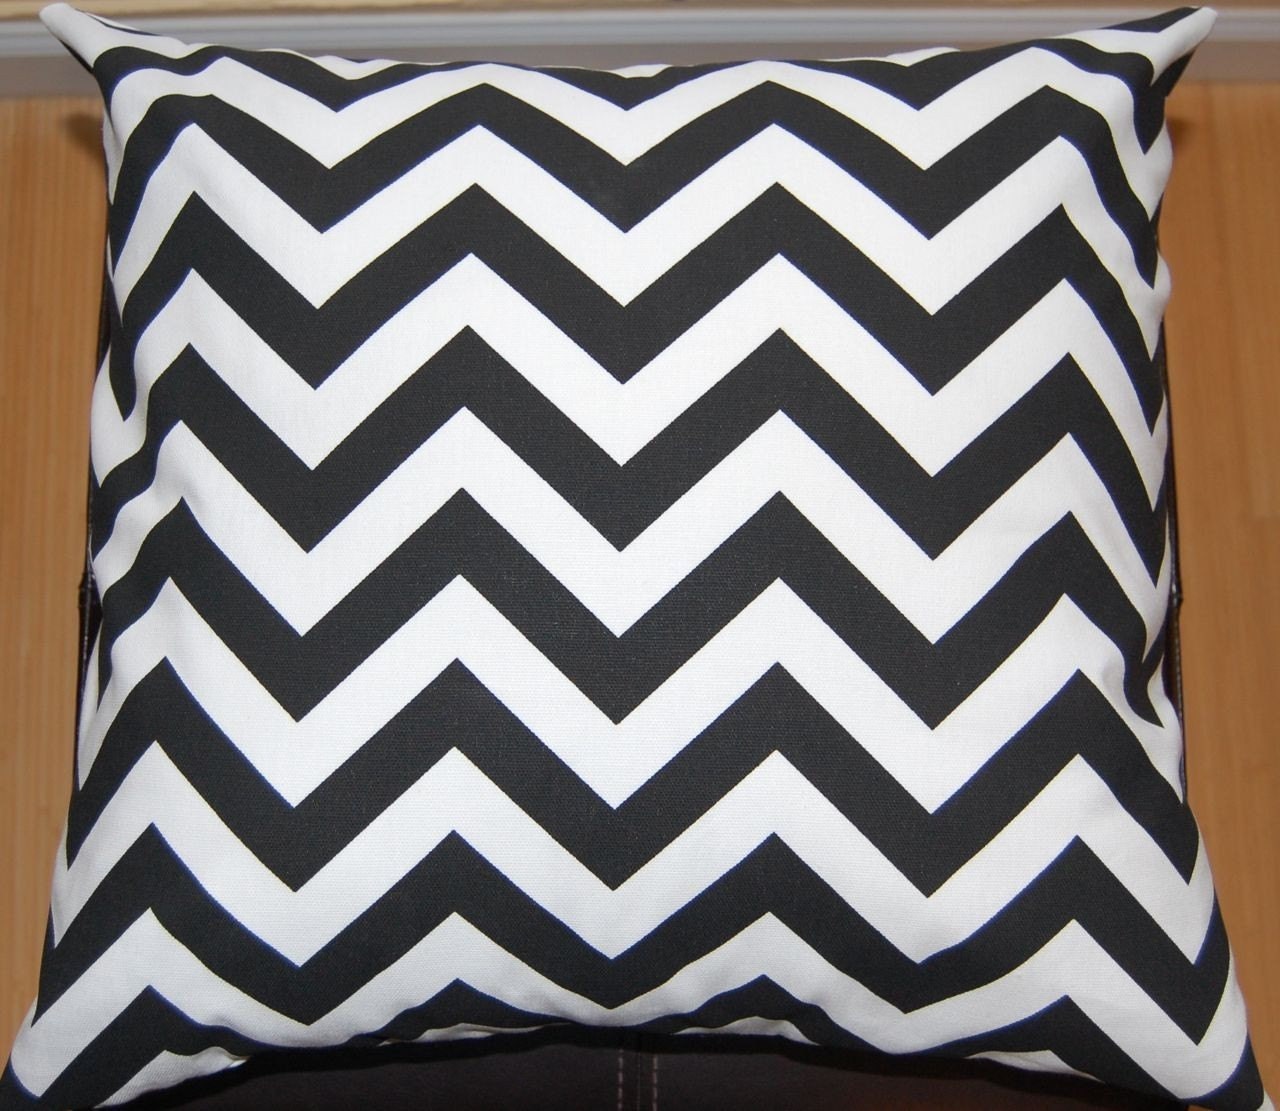 SPECIAL BUY - Pair of Decorative Toss Pillow Covers - SHIPS TODAY - 20 Inches - Black and White Zig Zag